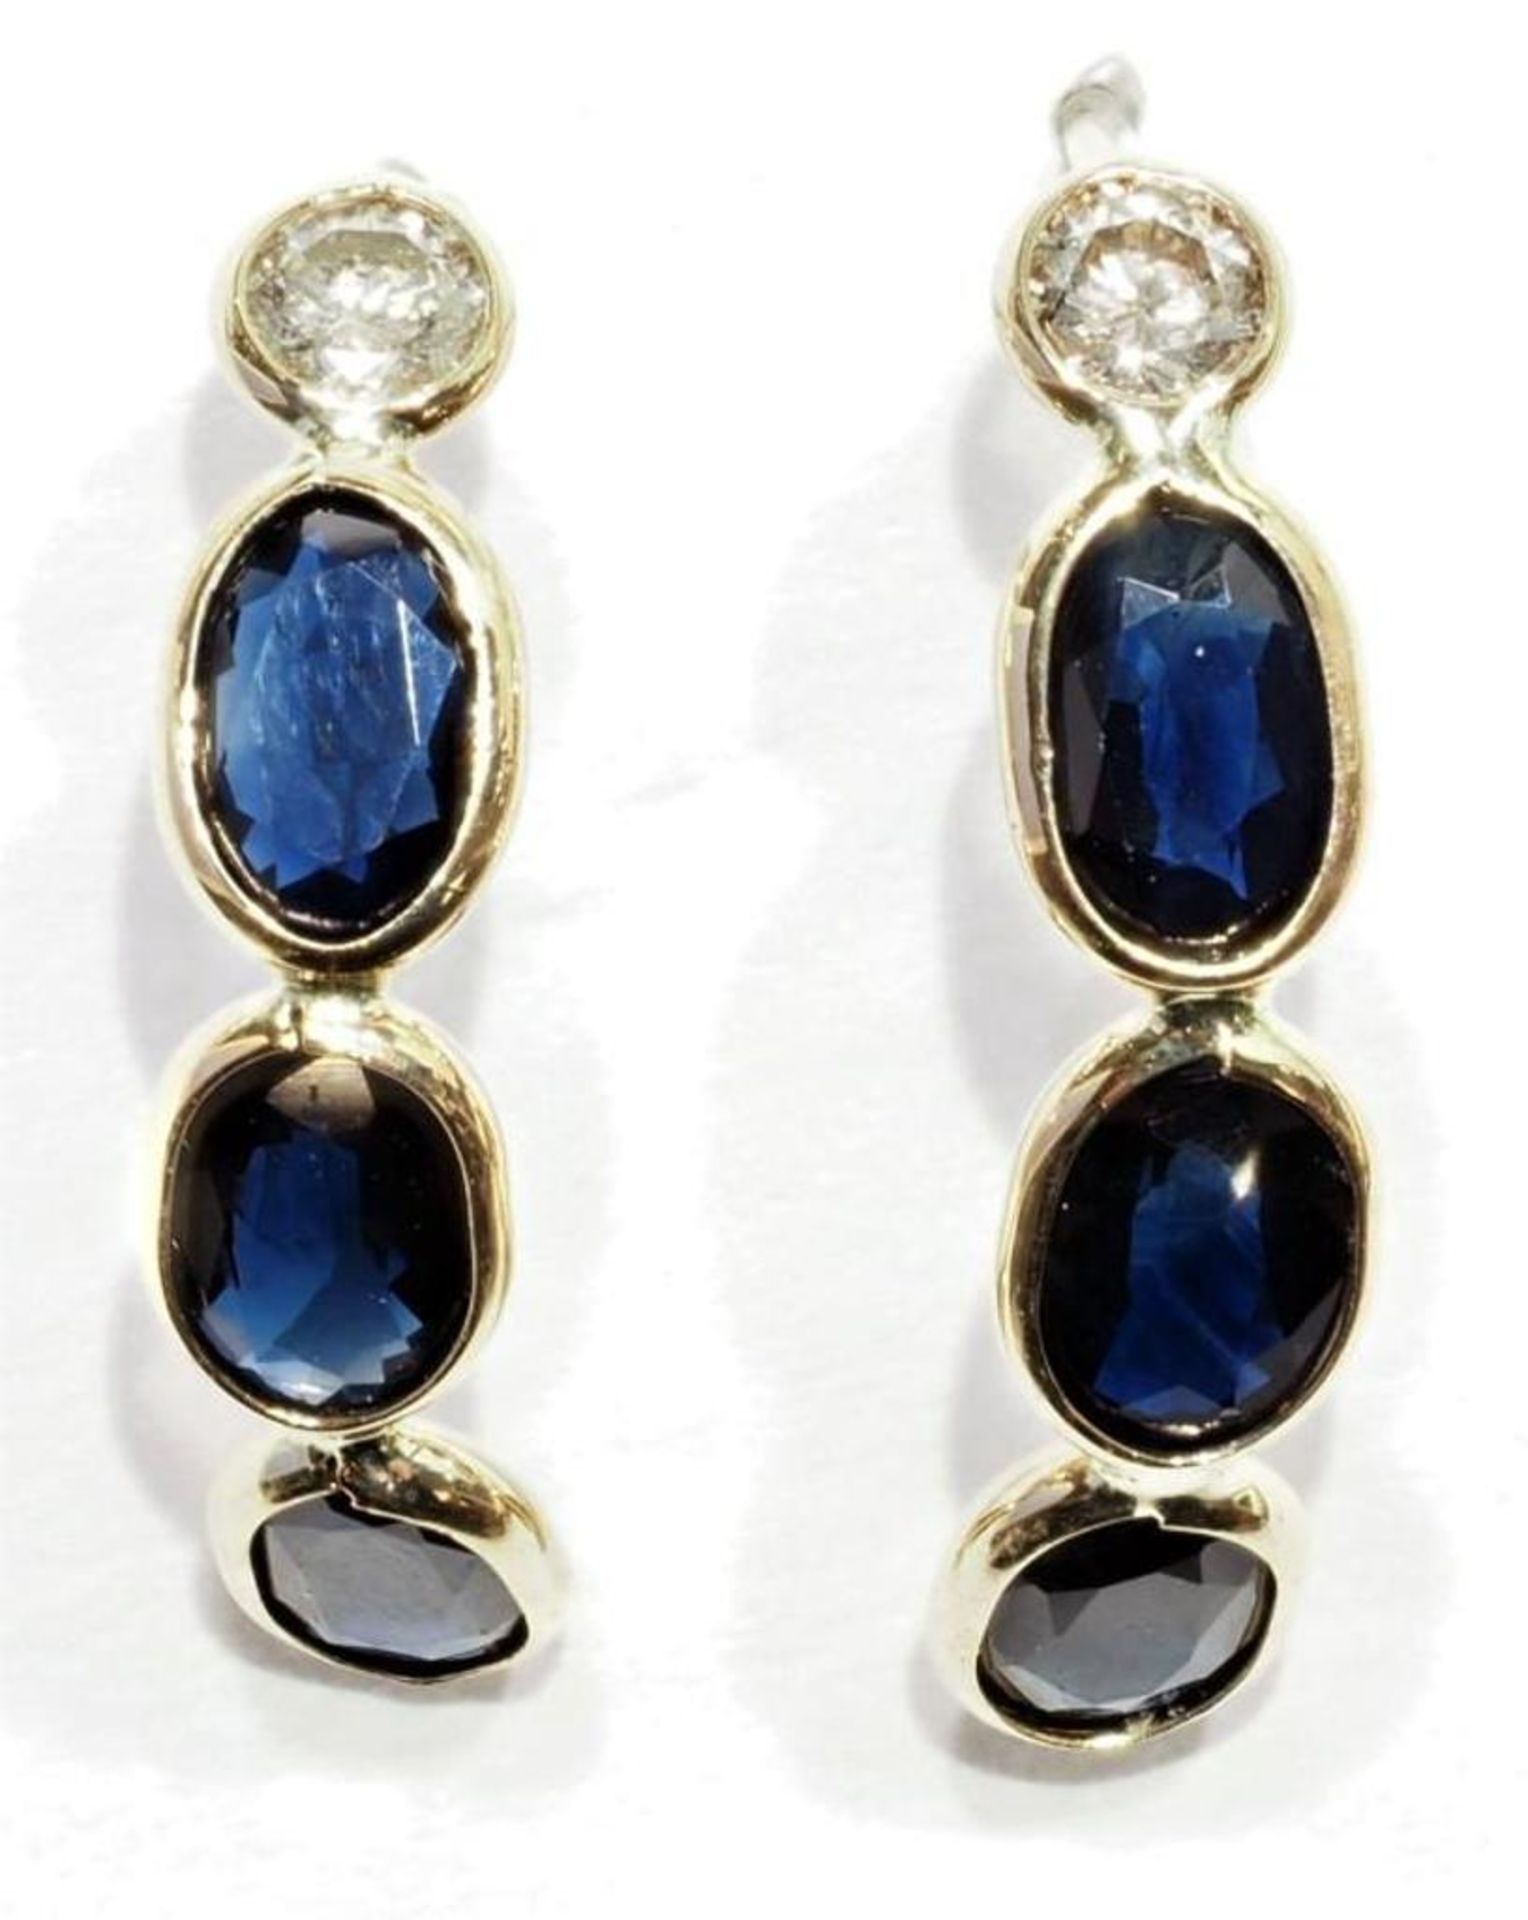 14K Yellow Gold Sapphire (3.50ct) and Diamond (0.23ct) Earrings. Insurance Value $3001